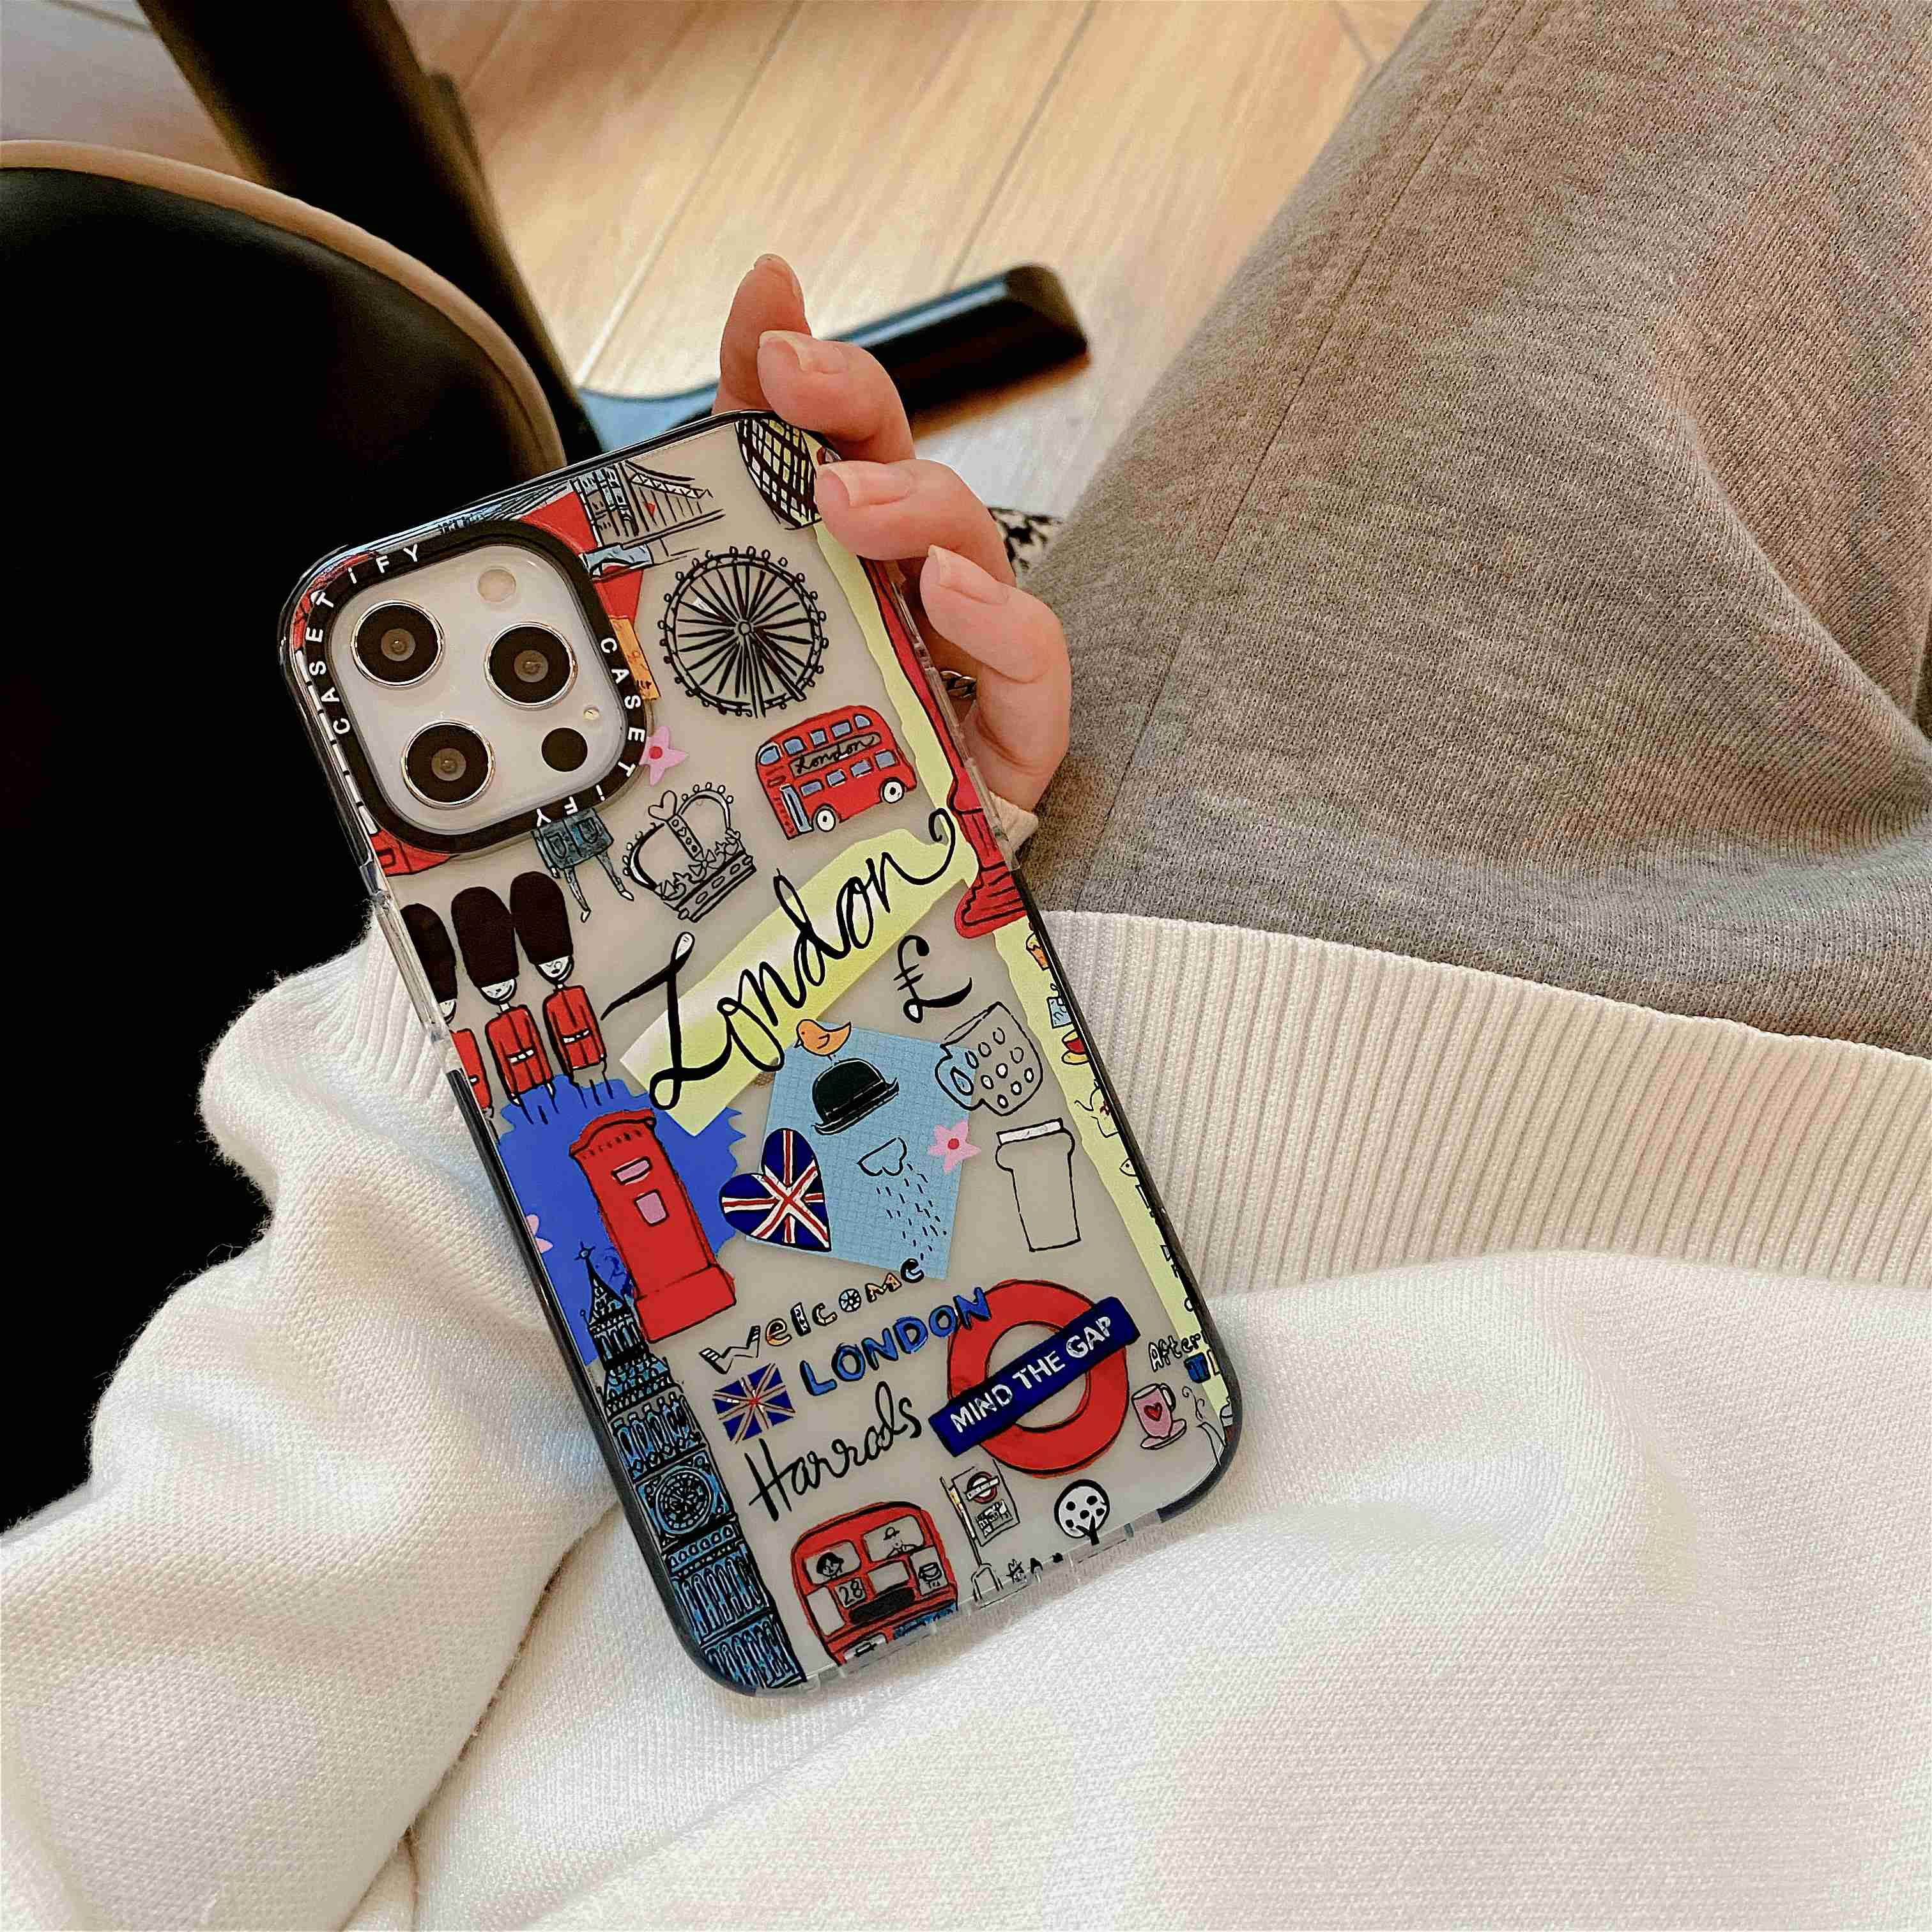 【High Quality+CaseTIFY】case iphone 11 pro max iphone 6 plus iphone x iphone 12 por max iphone 7 plus iphone 6s iphone 8 plus iphone xr iPhone xs max iphone se2020 iphone 12 mini  Silicone Protective Case